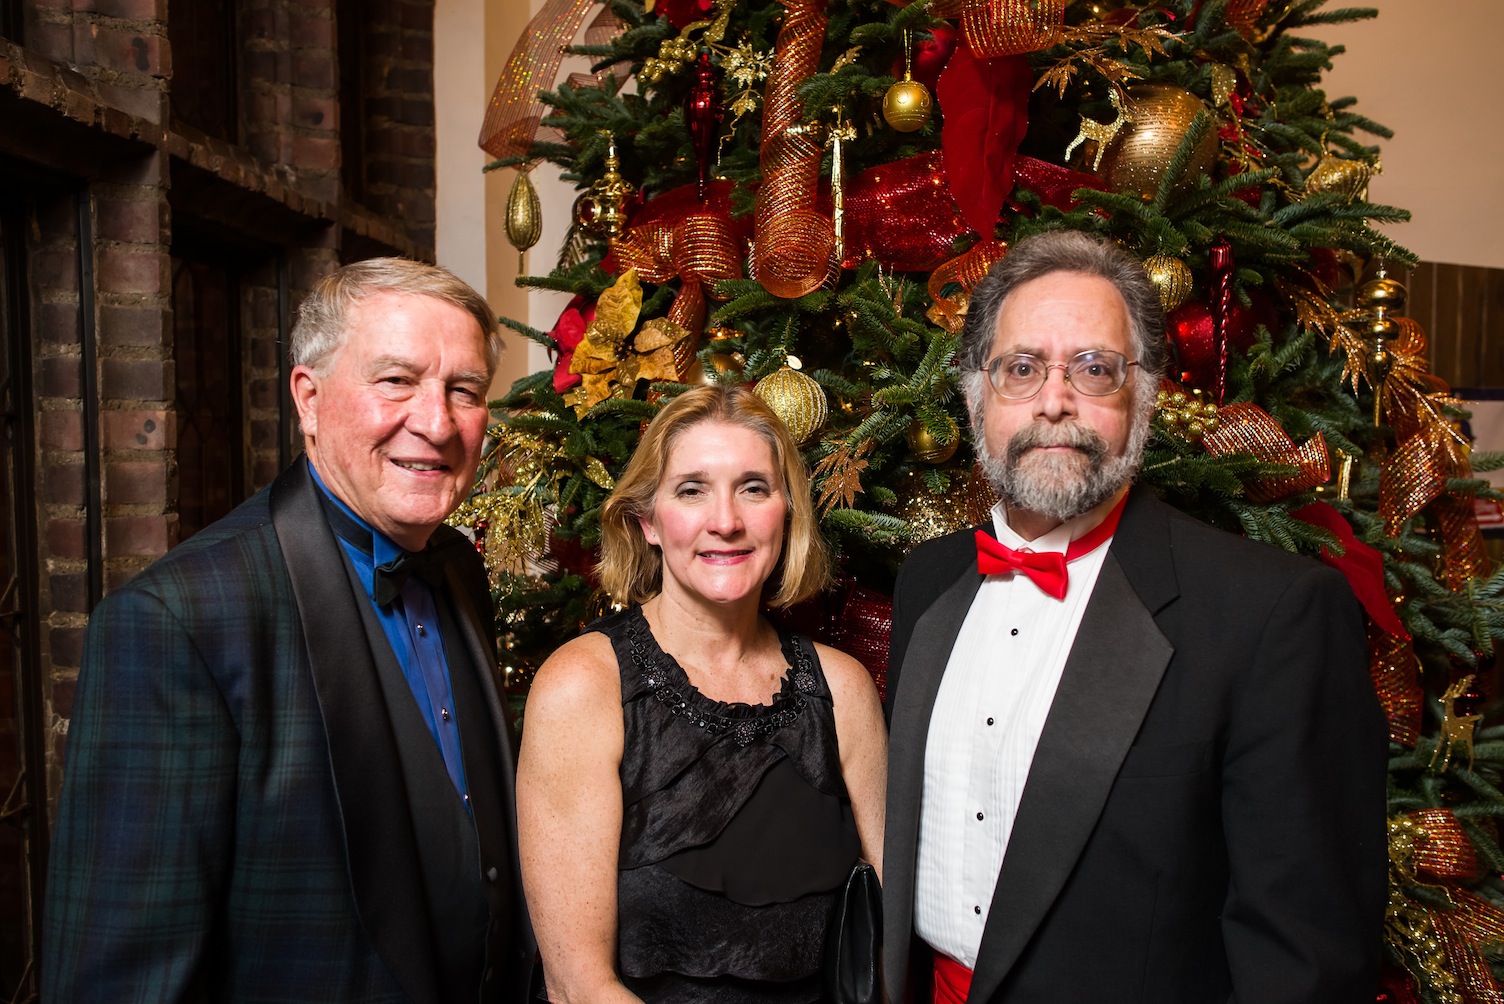 (Left to right) Marv Woodall, Heritage Conservancy Chairman, Mary Lou McFarland, President of the Conservancy of Montgomery County, and Jeffrey L. Marshal, Heritage Conservancy President, at Heritage Conservancy's annual Christmas for Aldie gala on December 2, 2012. Credit: Mike Landis